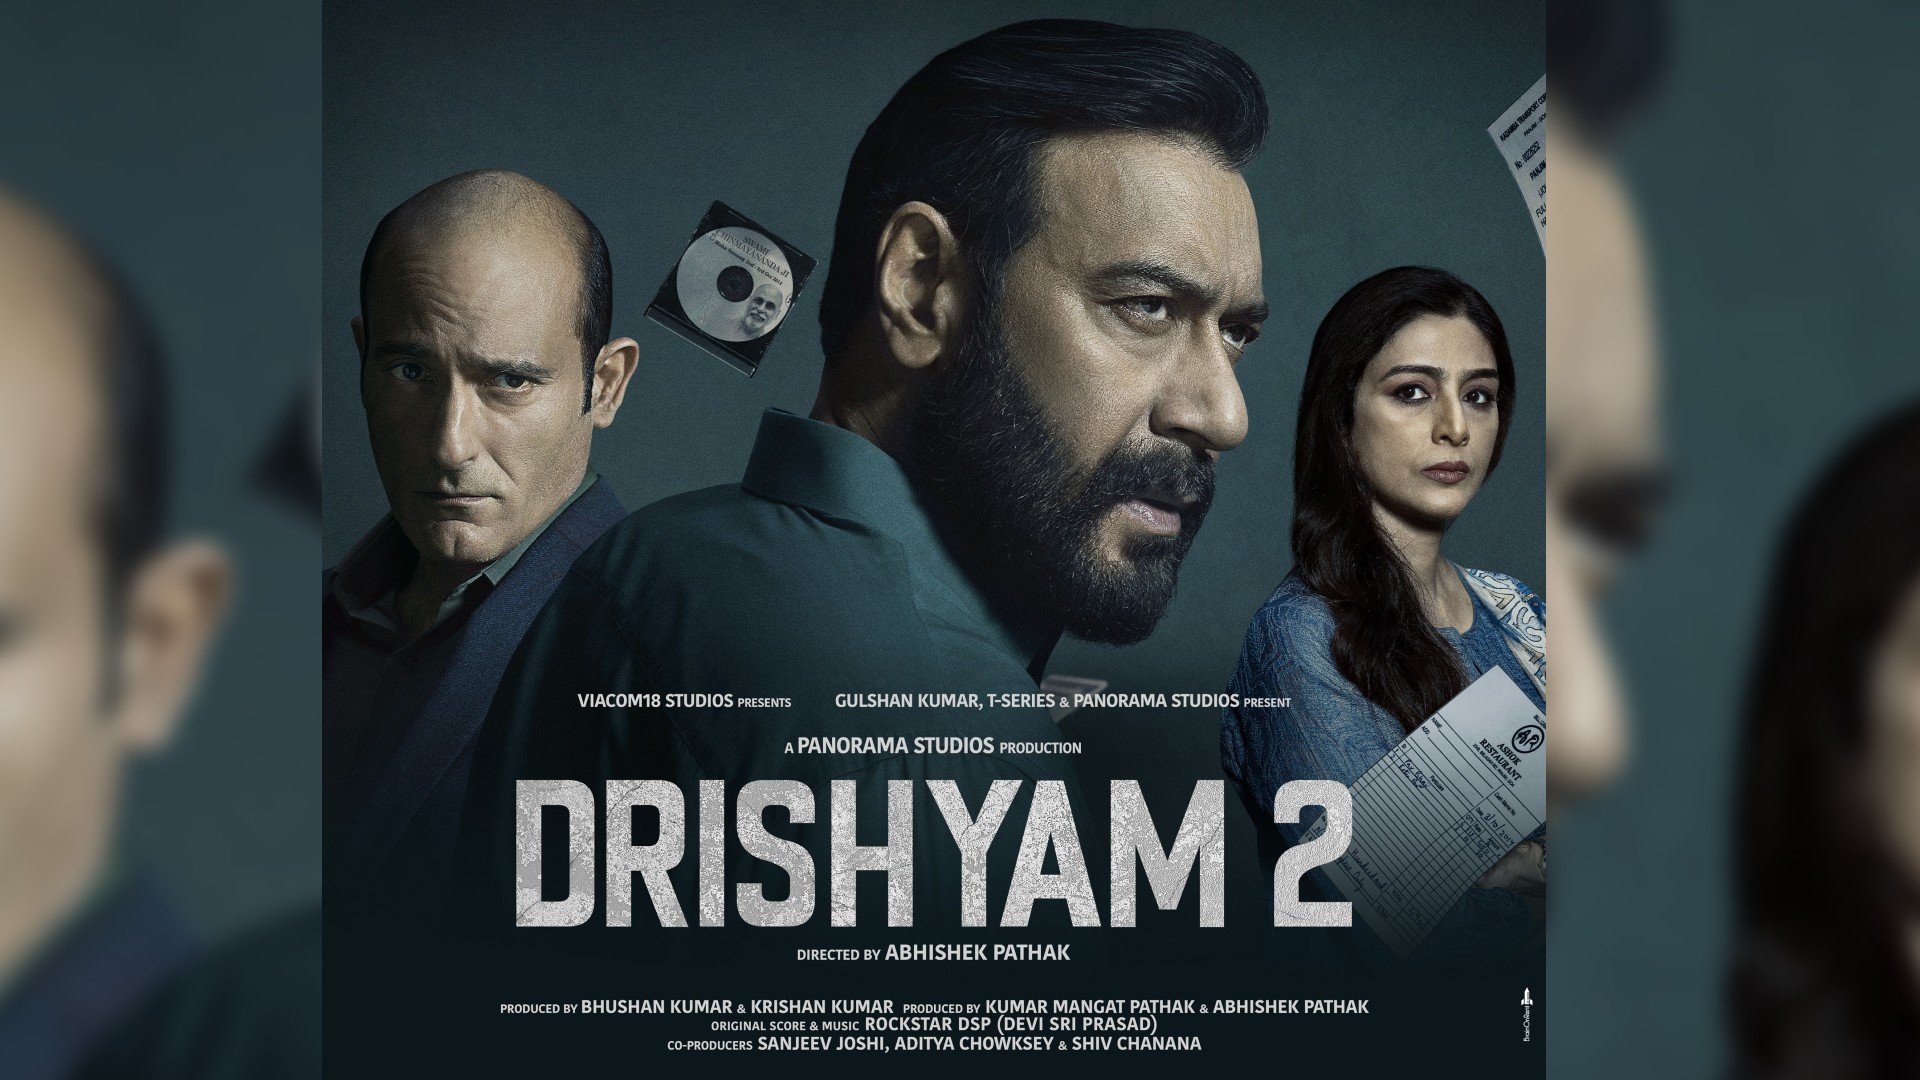 After the bumper success of 'Drishyam 2', 'Drishyam 3' will come soon, director Abhishek Pathak promises fans